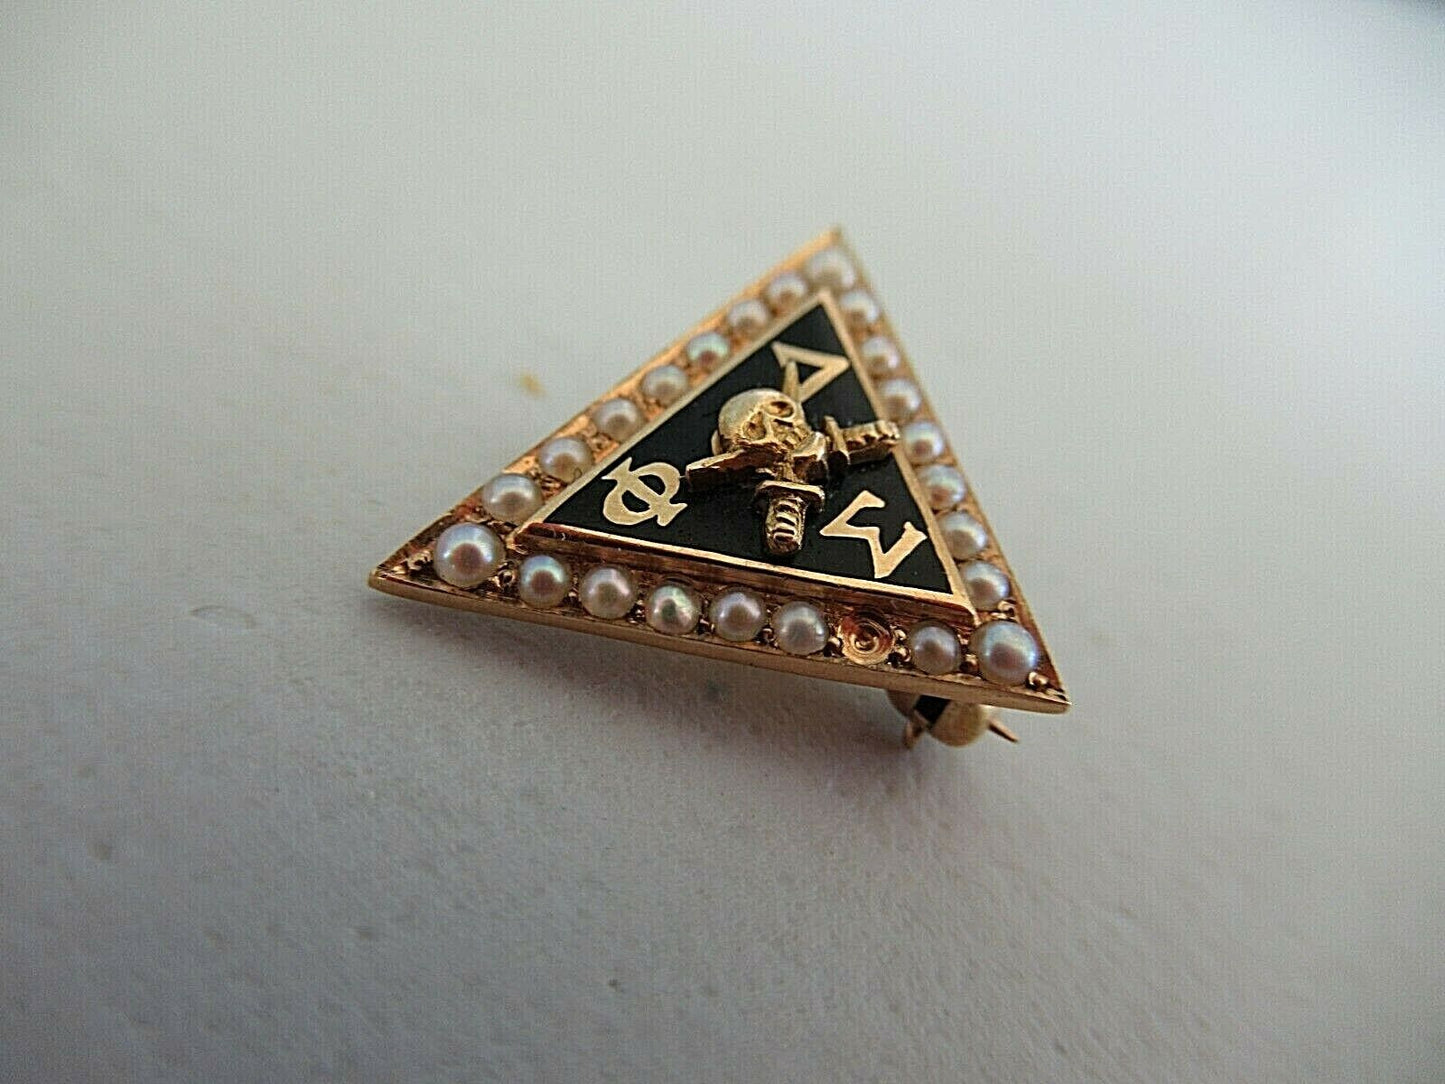 USA FRATERNITY PIN PHI SIGMA DELTA. MADE IN GOLD 14K. NAMED. MARKED. 1